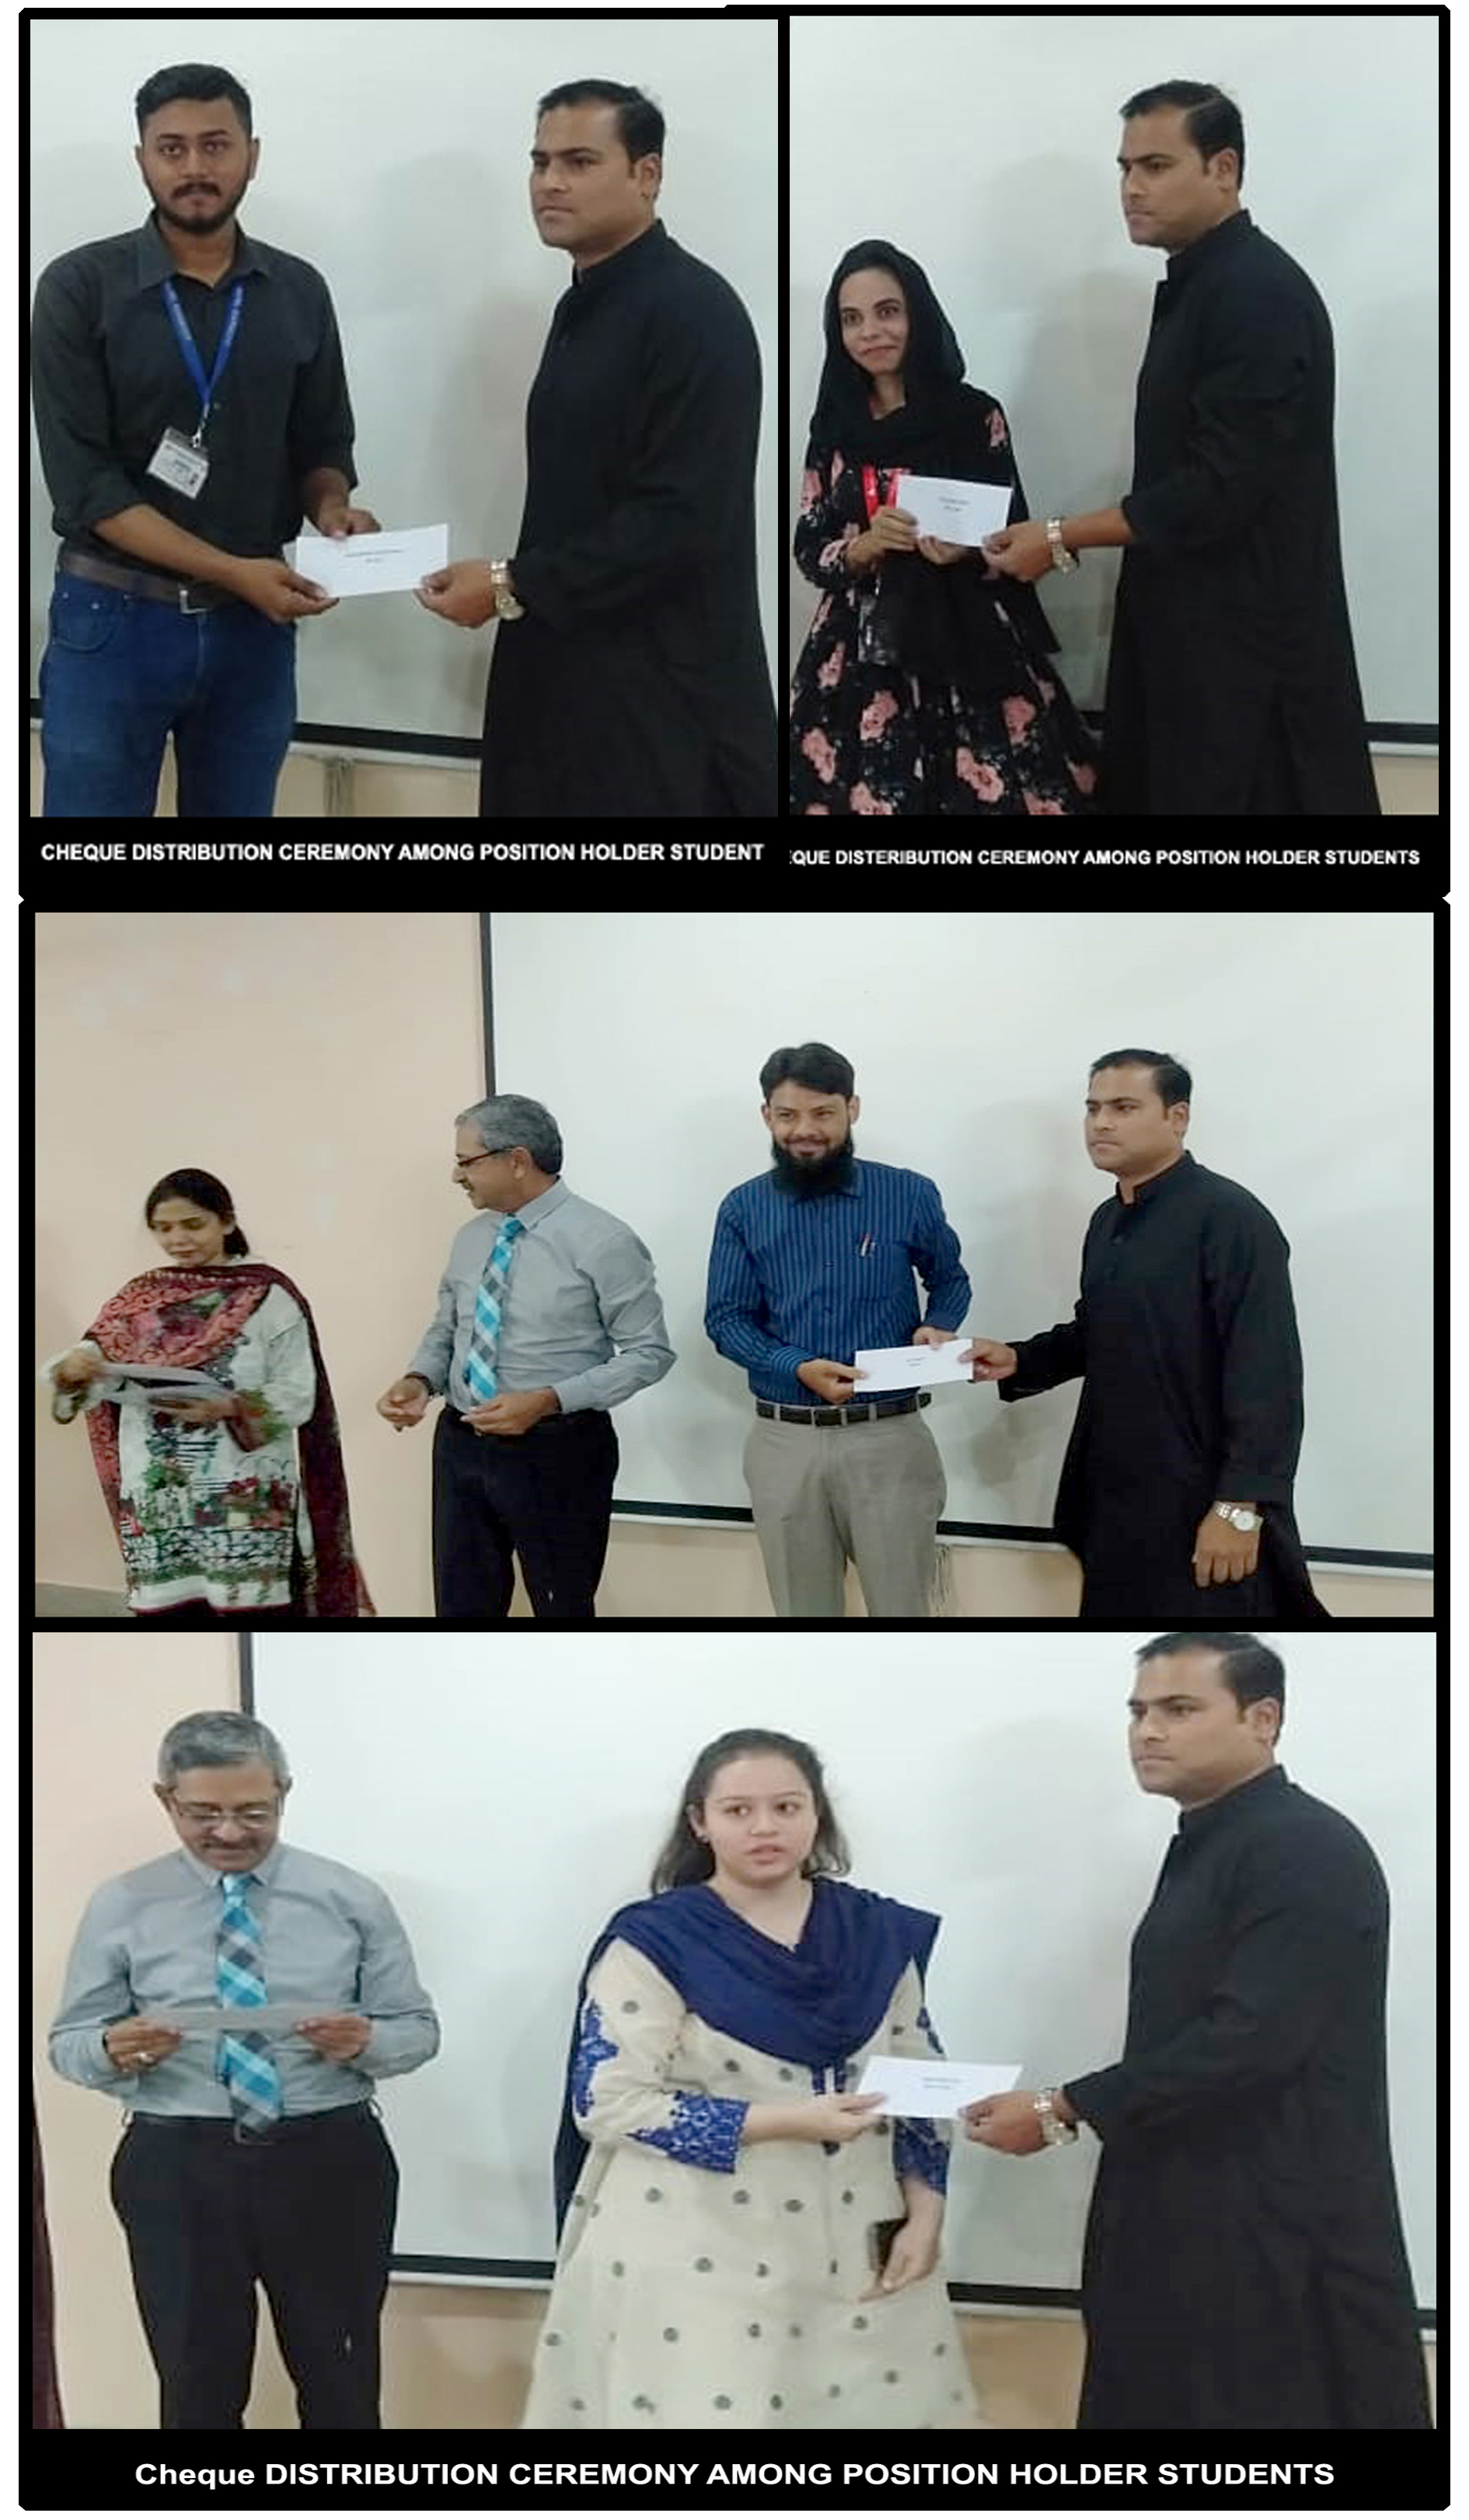 Cheque Distribution Ceremony Among Position Holder Students